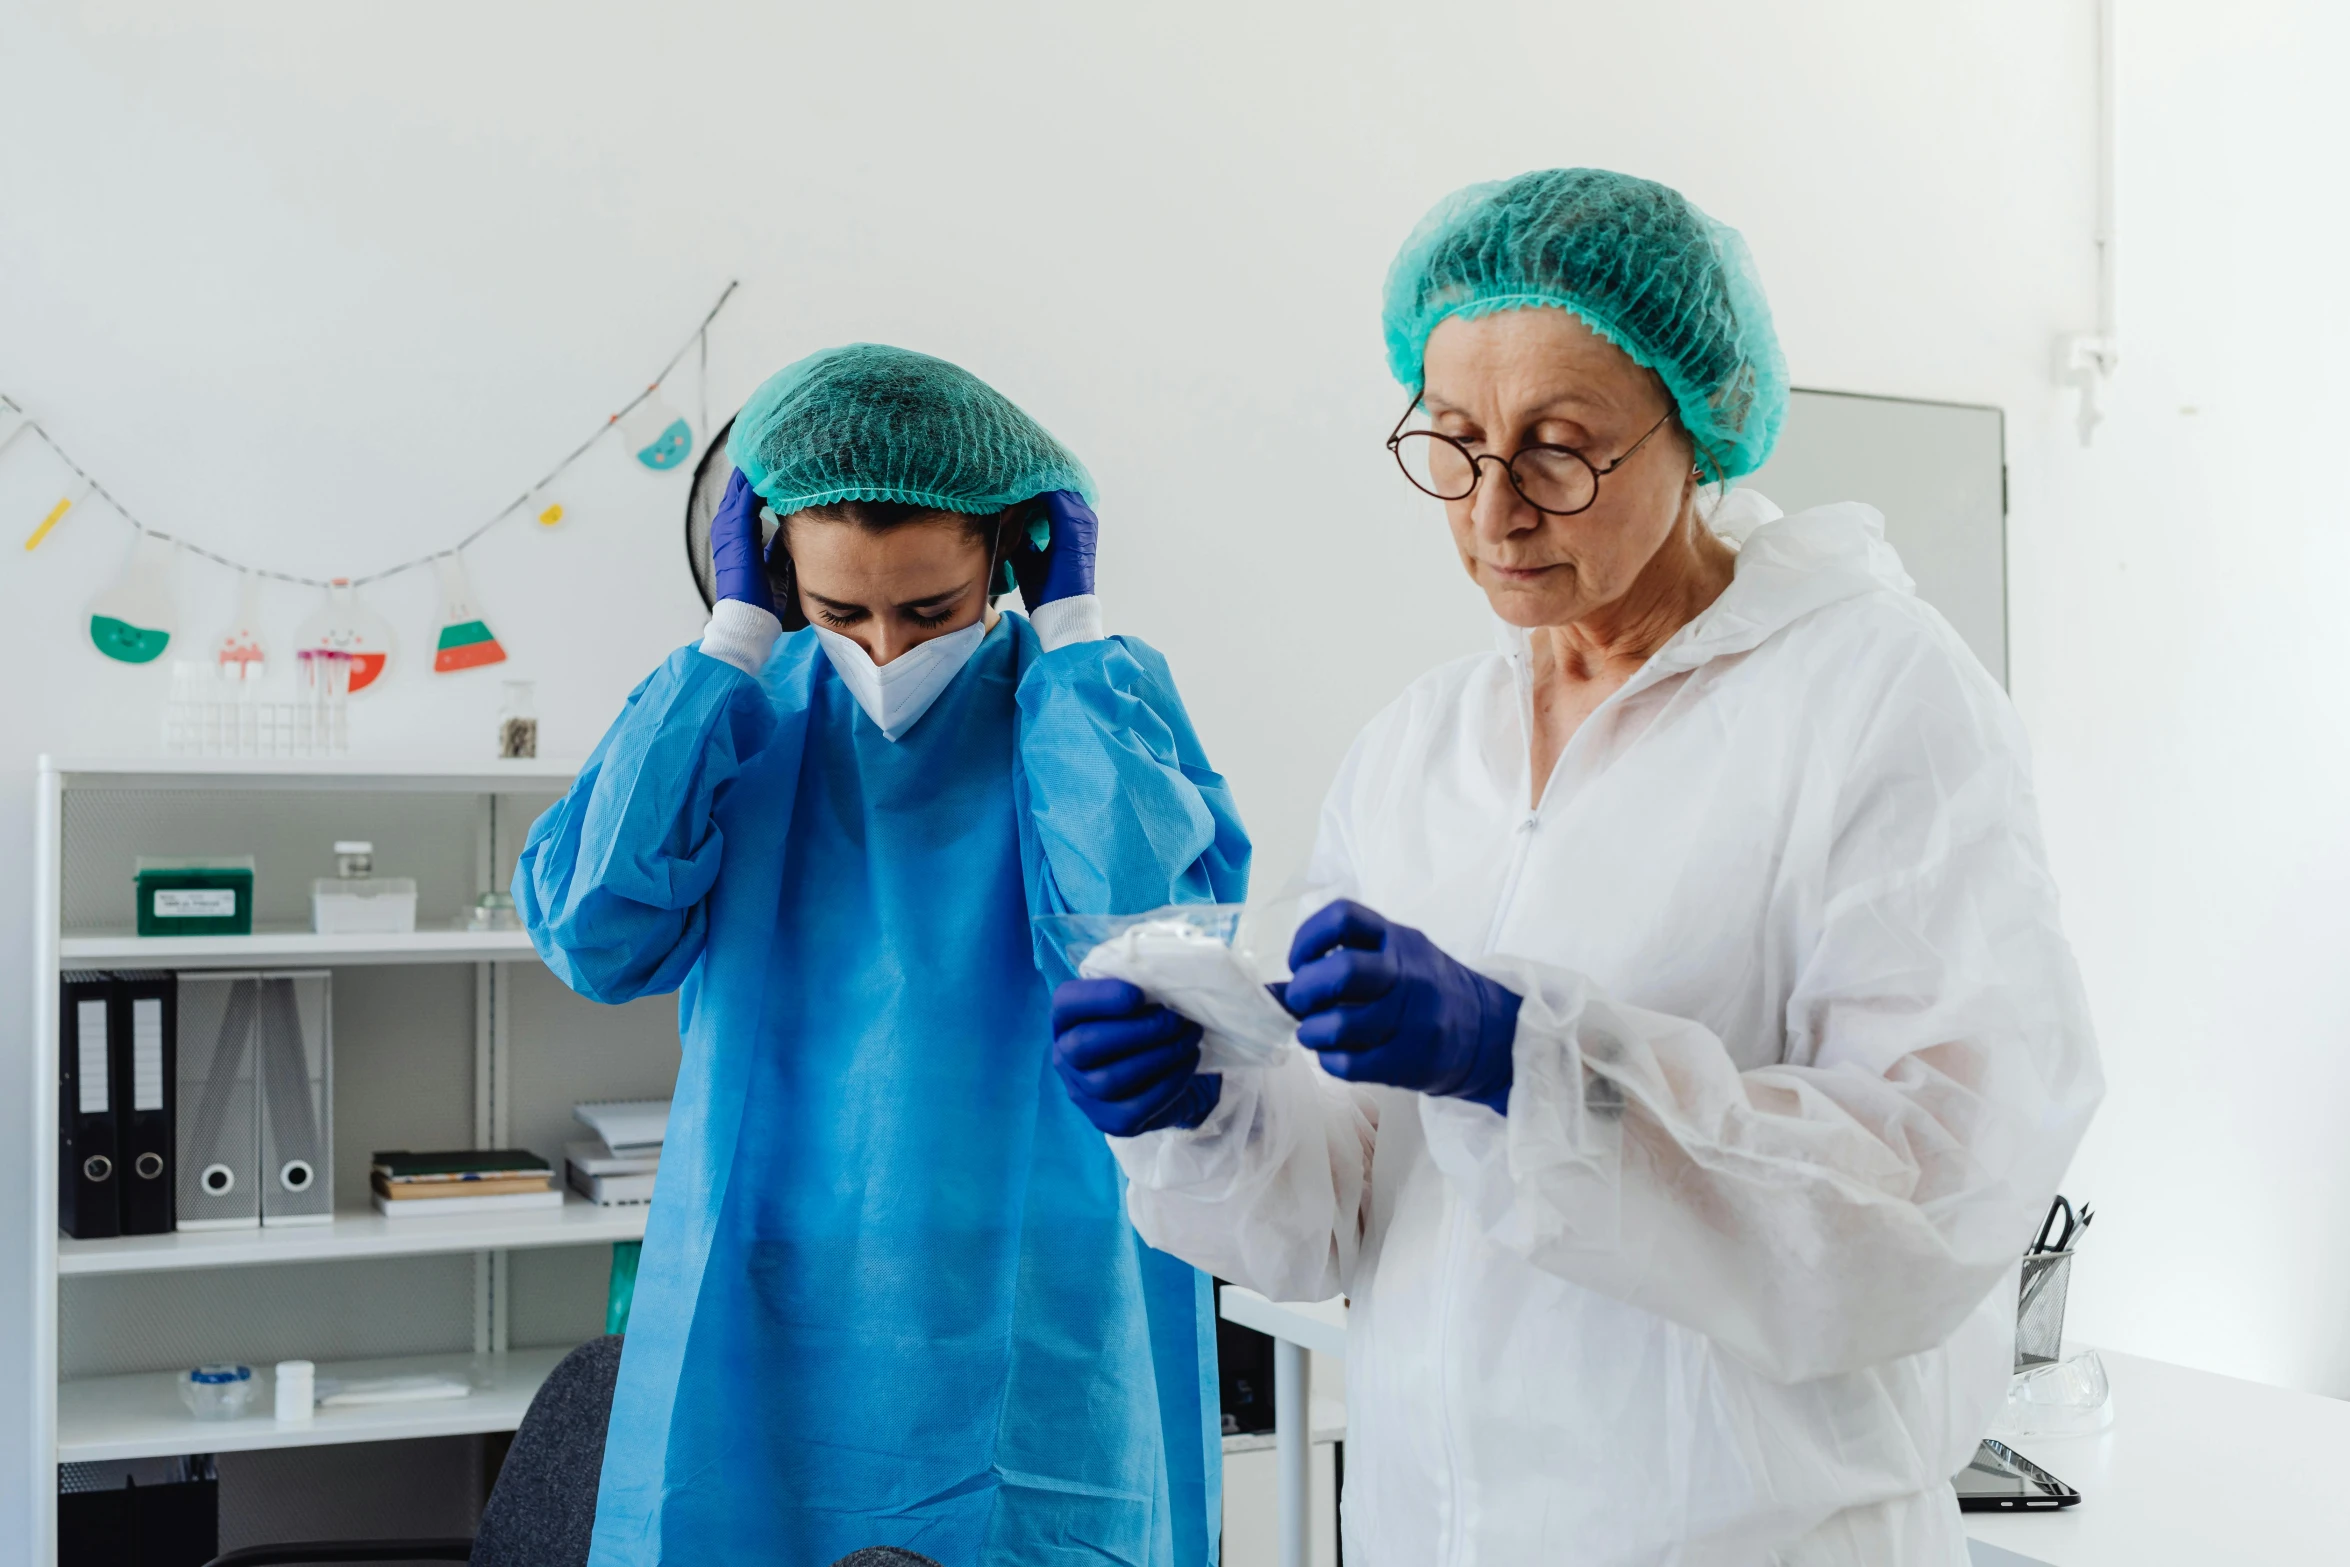 two women in sterile clothing working on some type of device